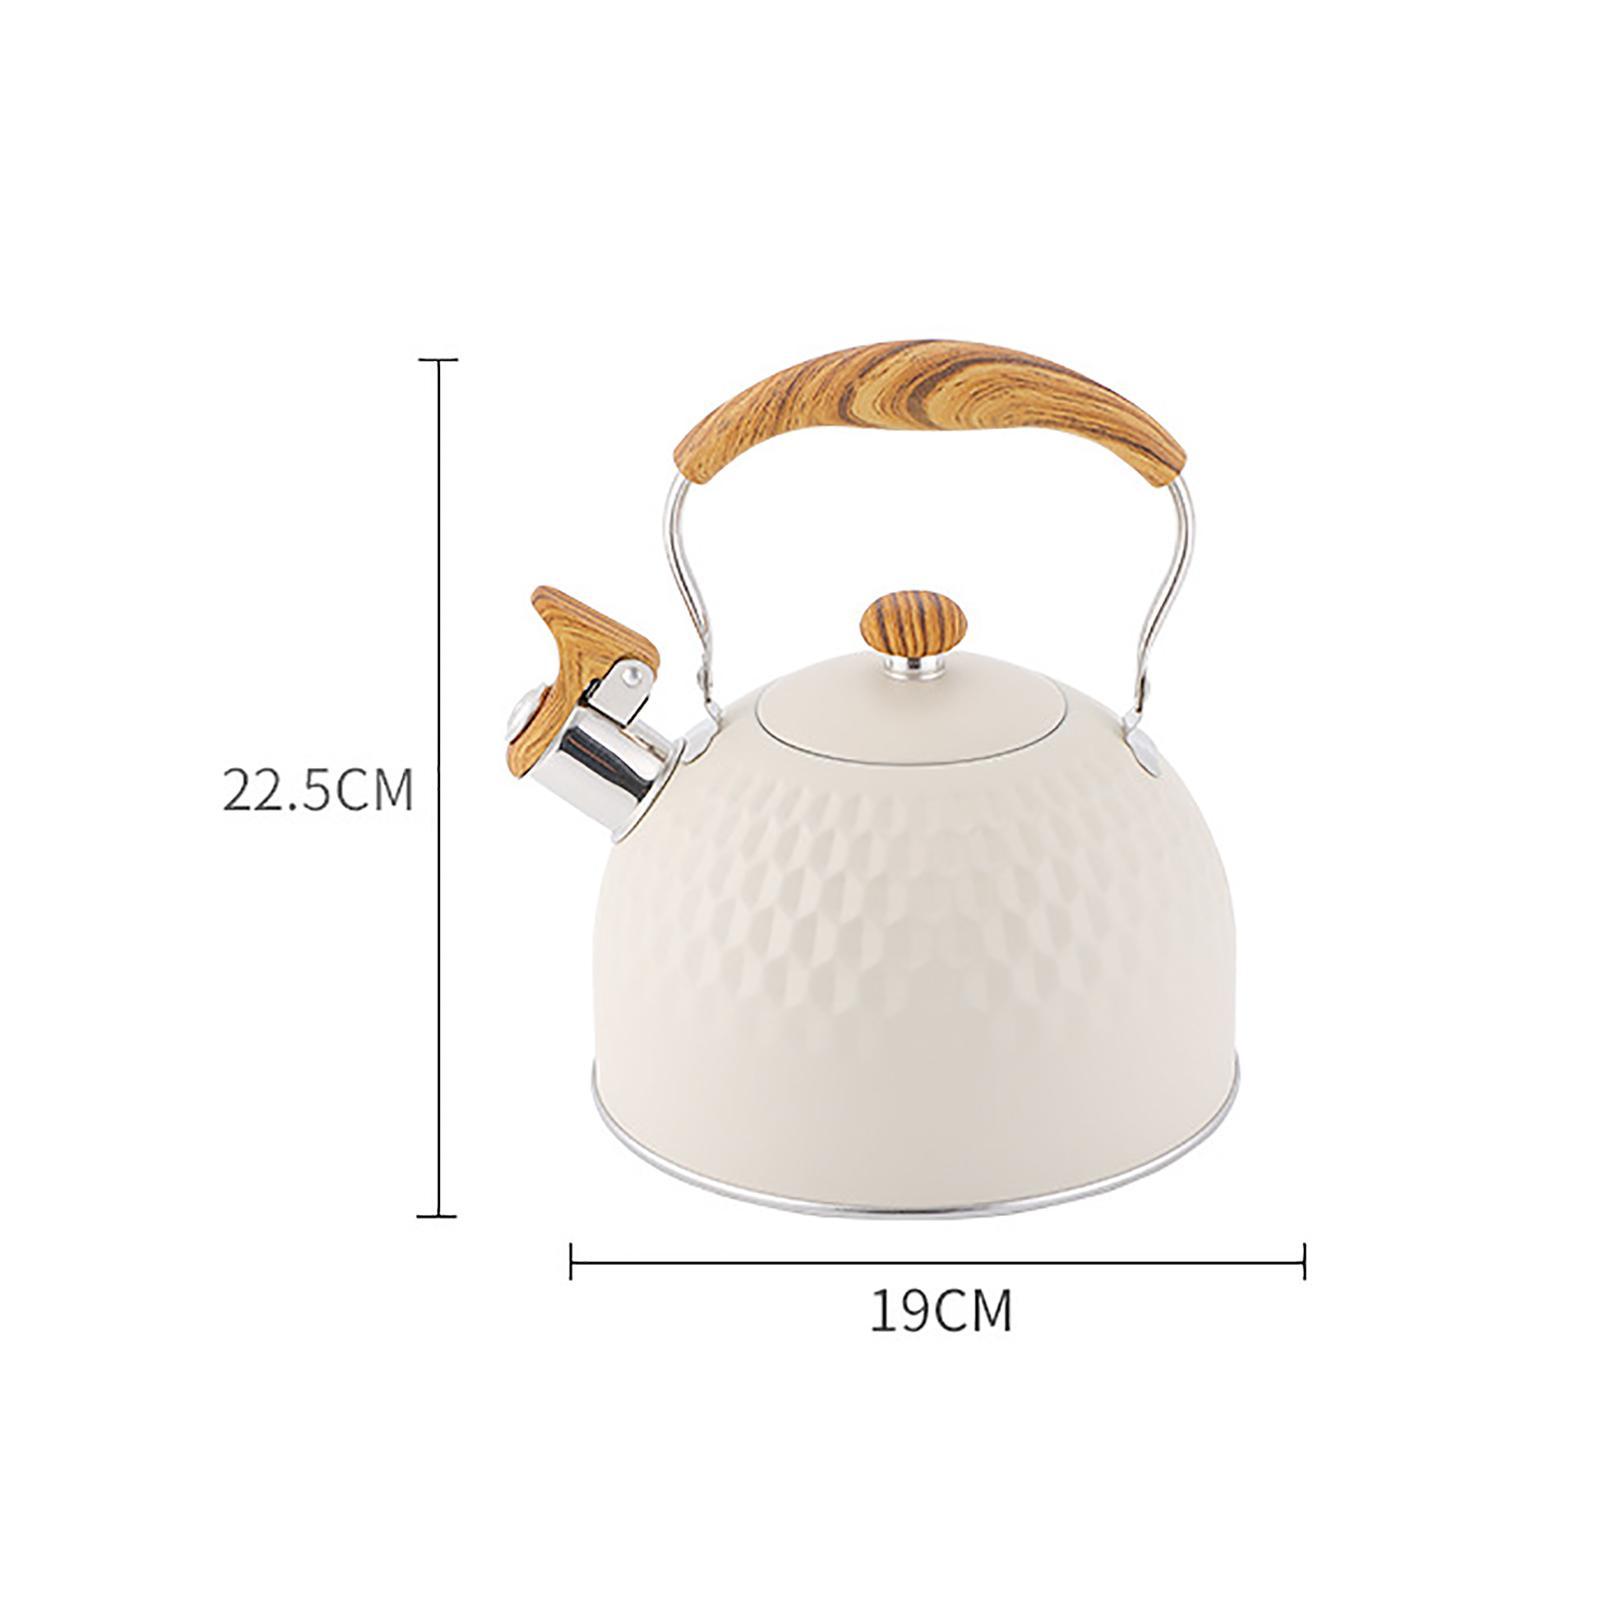 Stainless Steel Whistle Kettle for Tea Room Induction Cooker Making Coffee